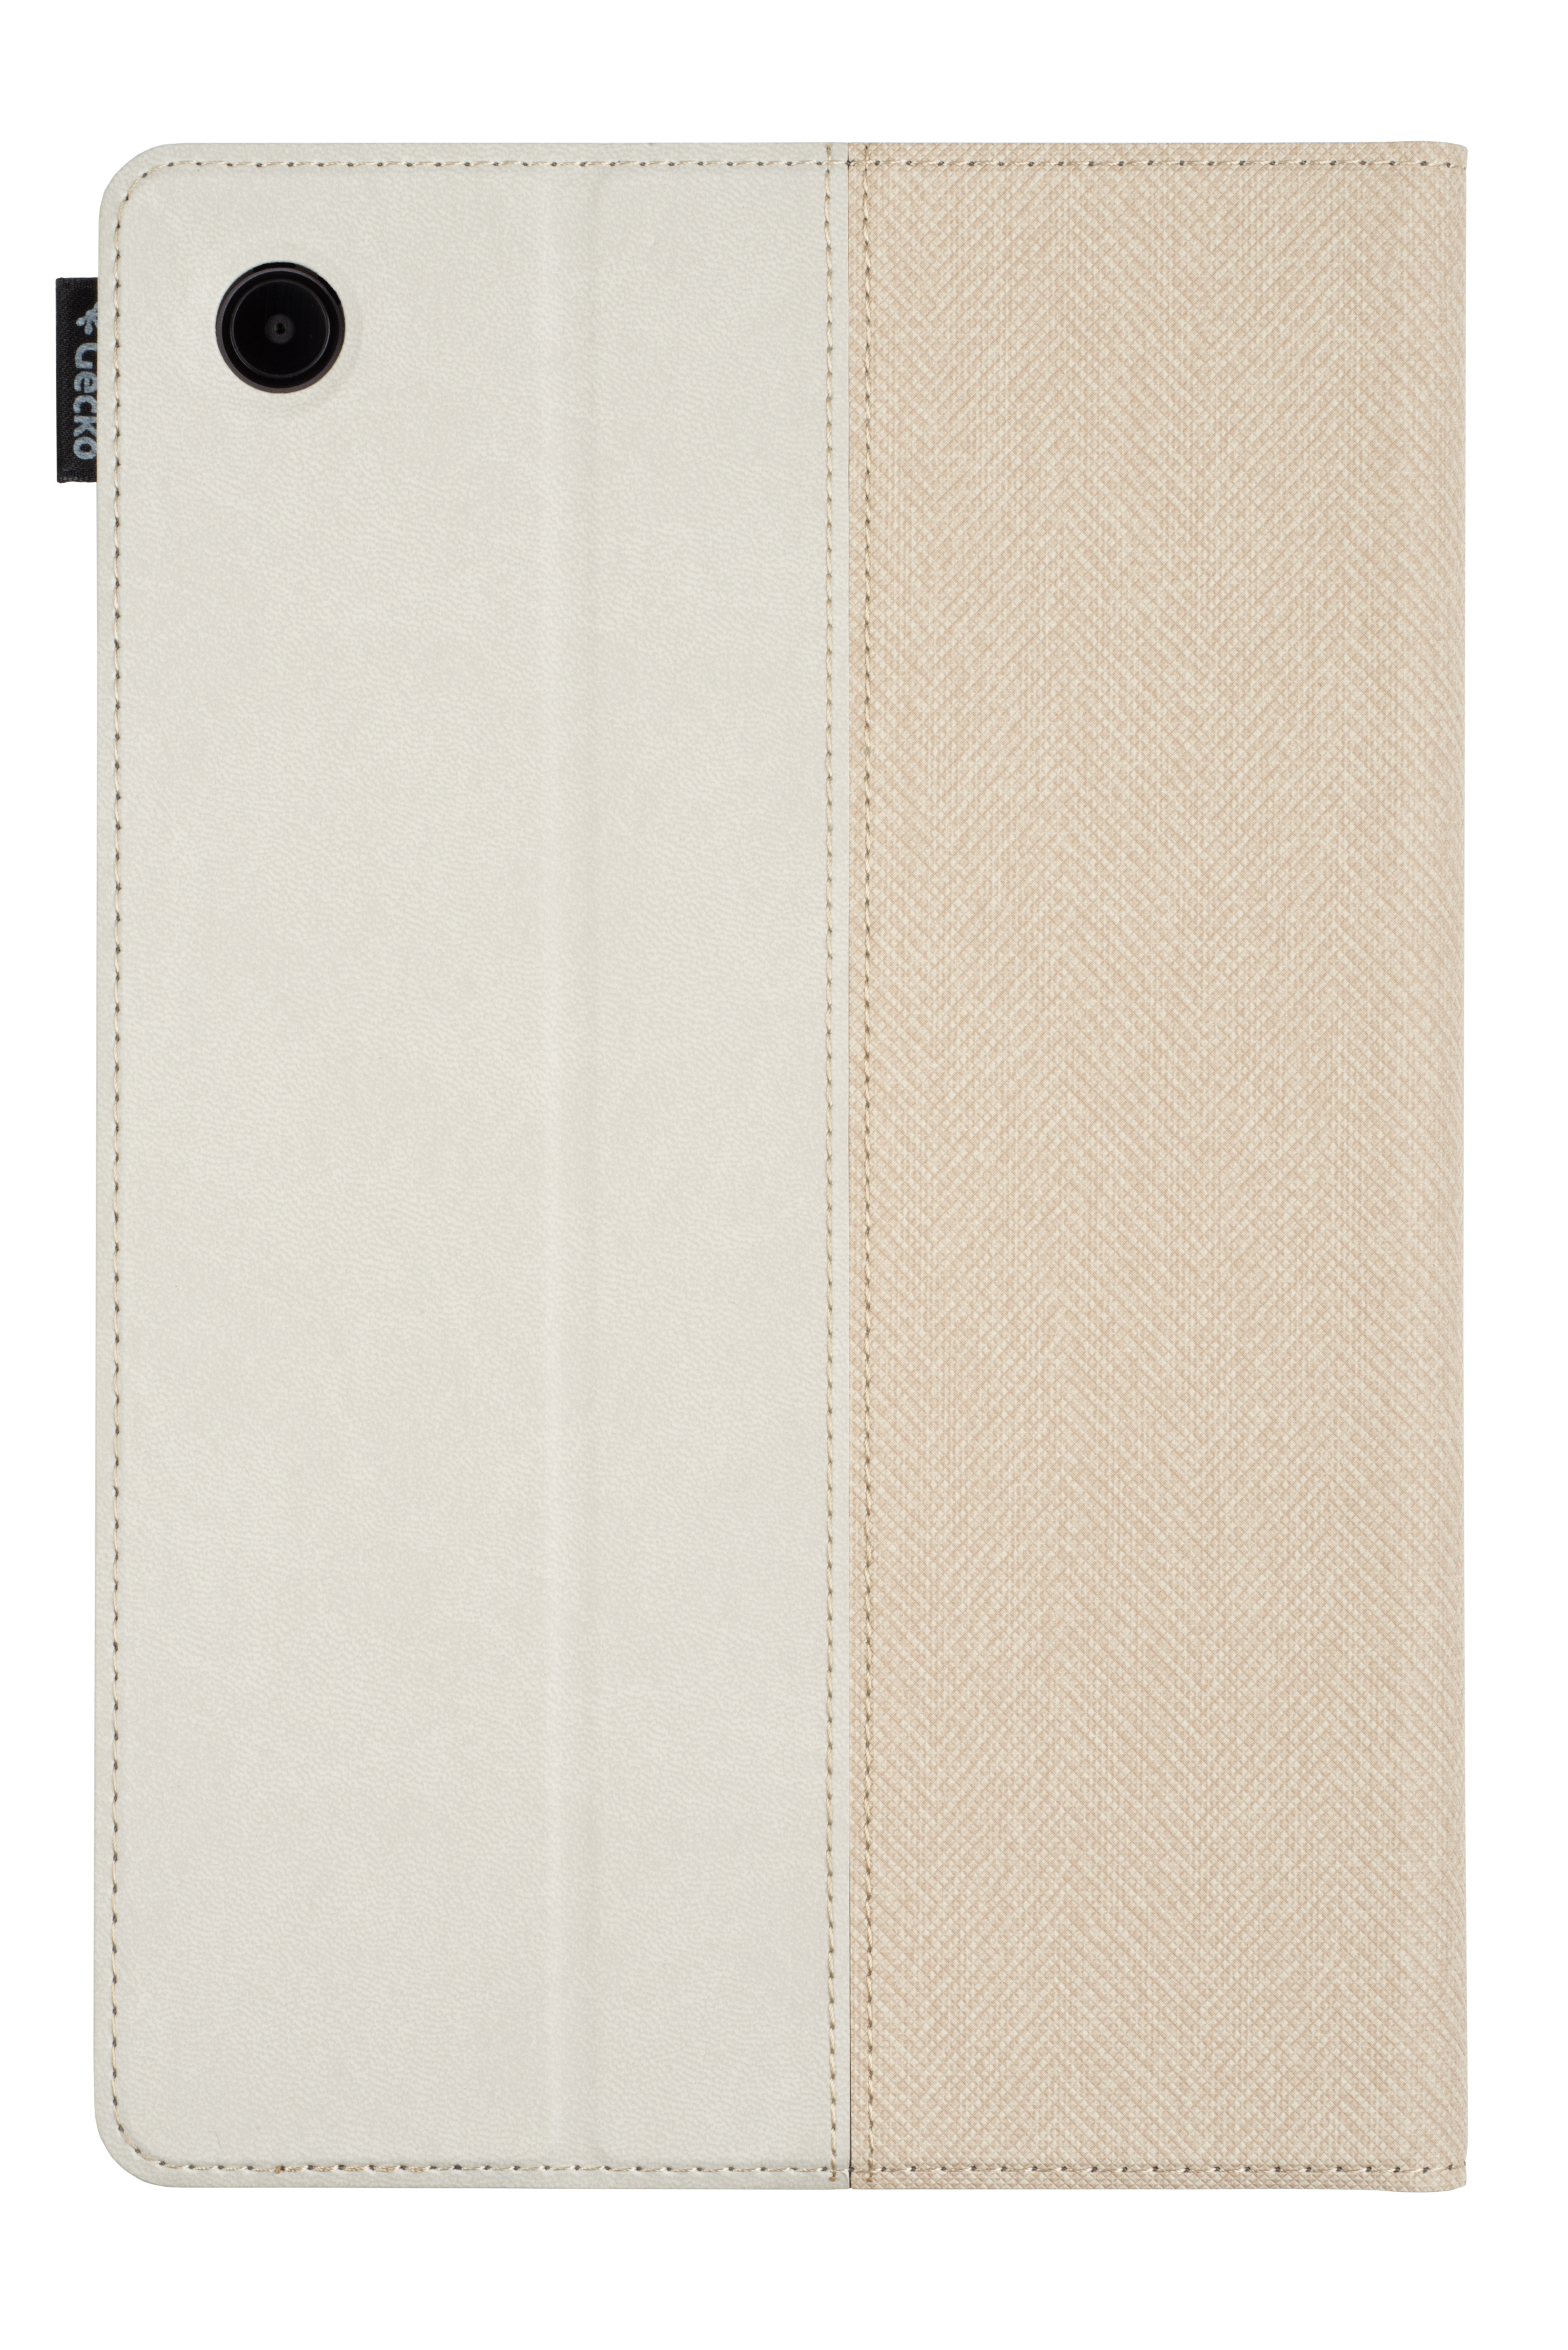 Gecko Covers Samsung Tab A8 Easy-Click 2.0 Cover Sand